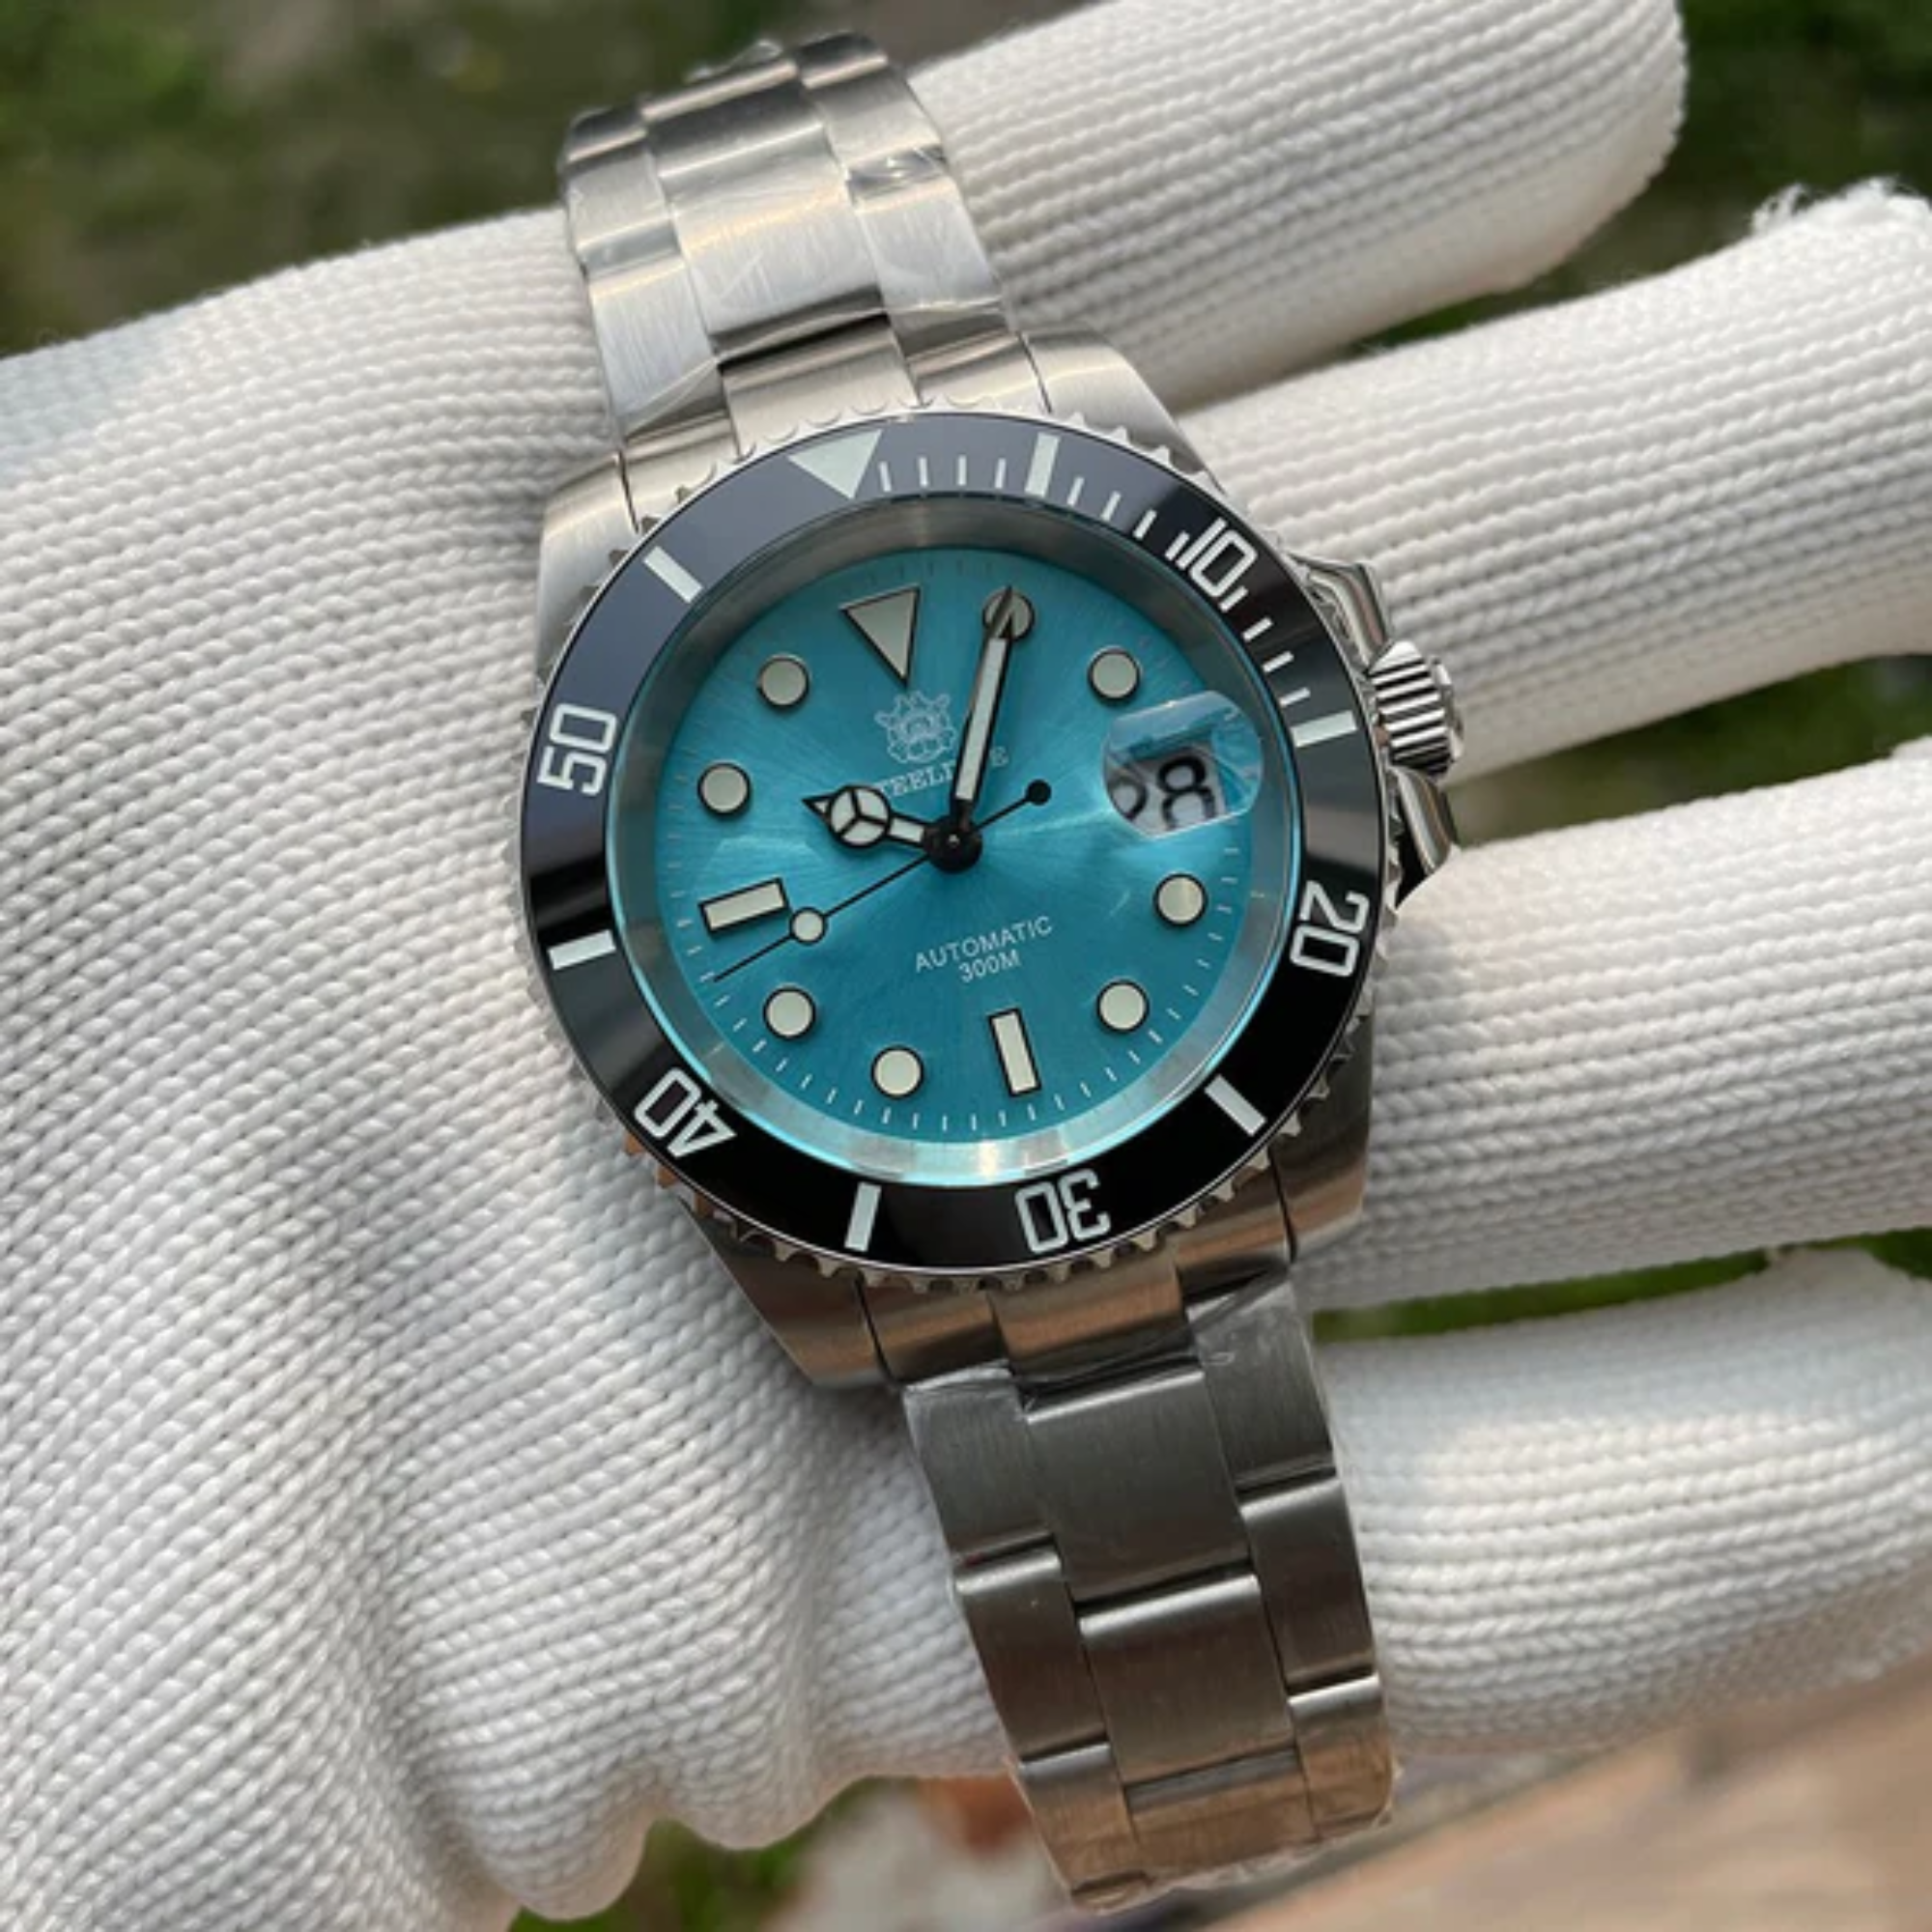 Steeldive SD1953 Sub Men Dive Watch V2 Light Blue Dial With Oyster Bracelet